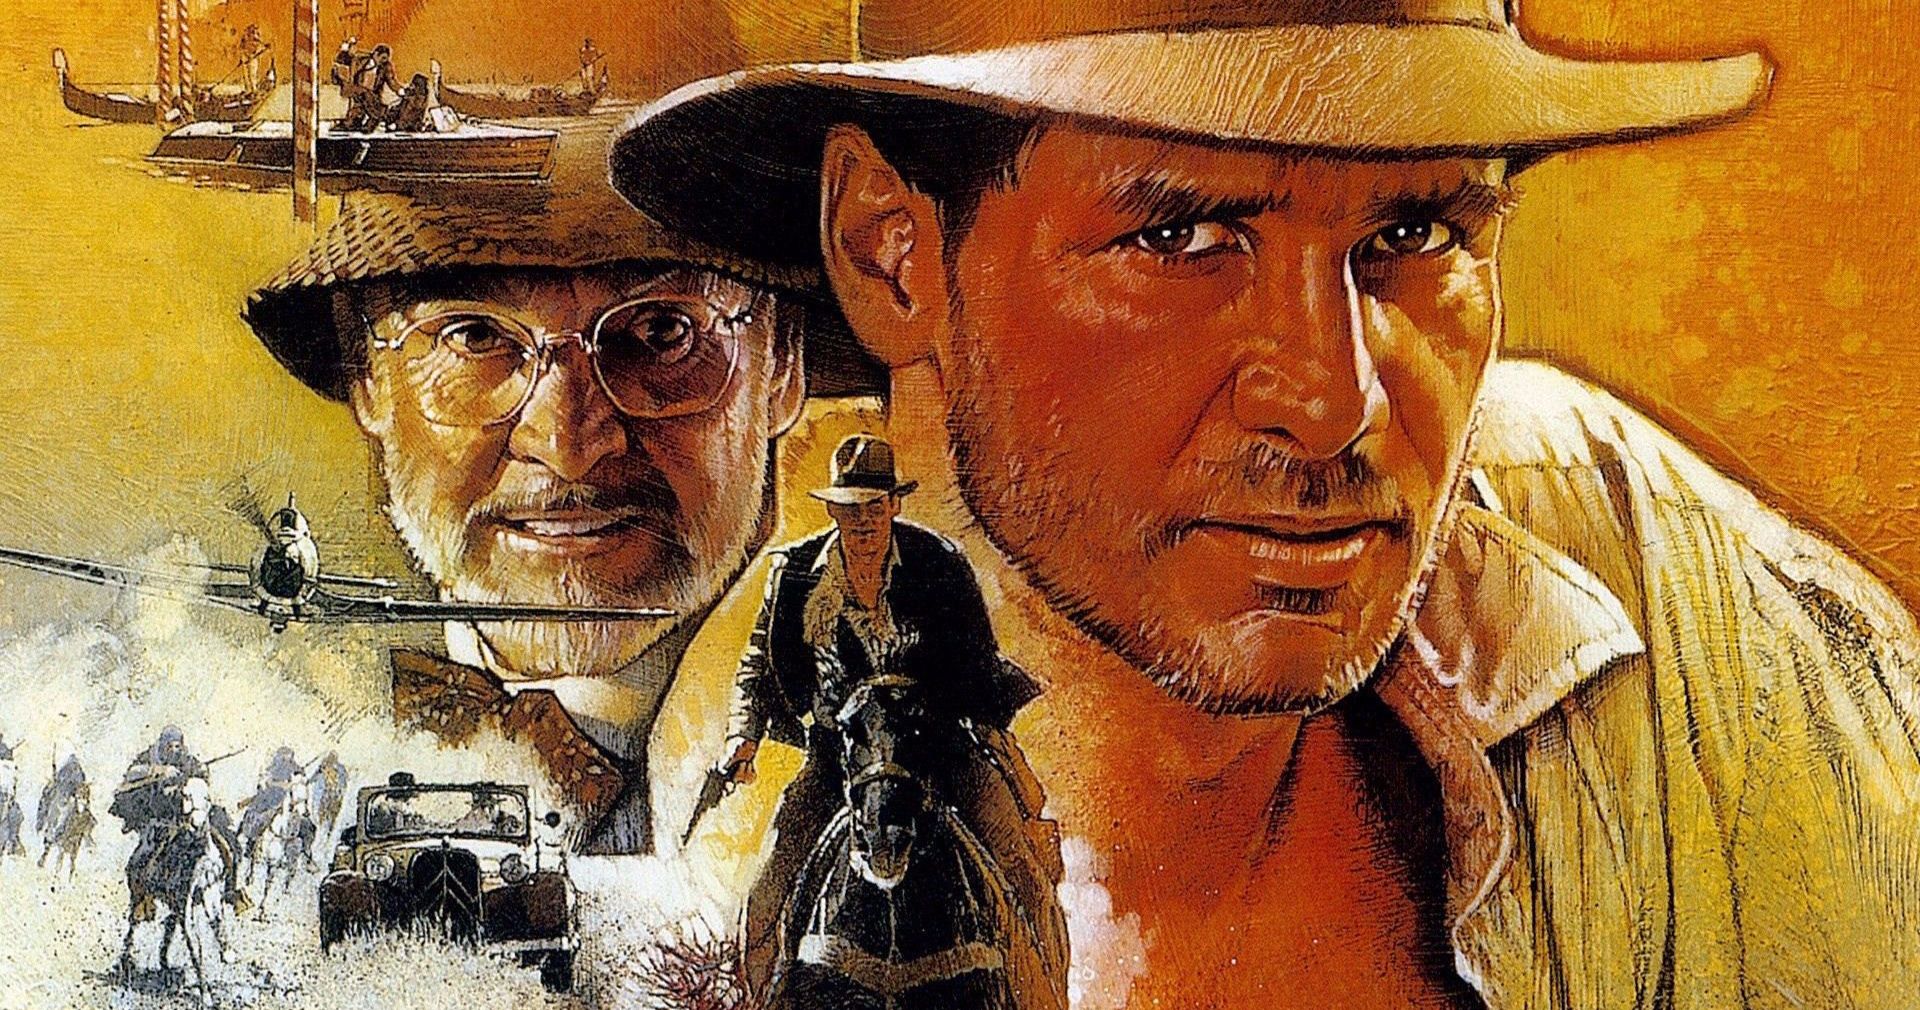 Indiana Jones 5 Producer Doesn't Want Fans to Worry: We've Got the Best of Everything